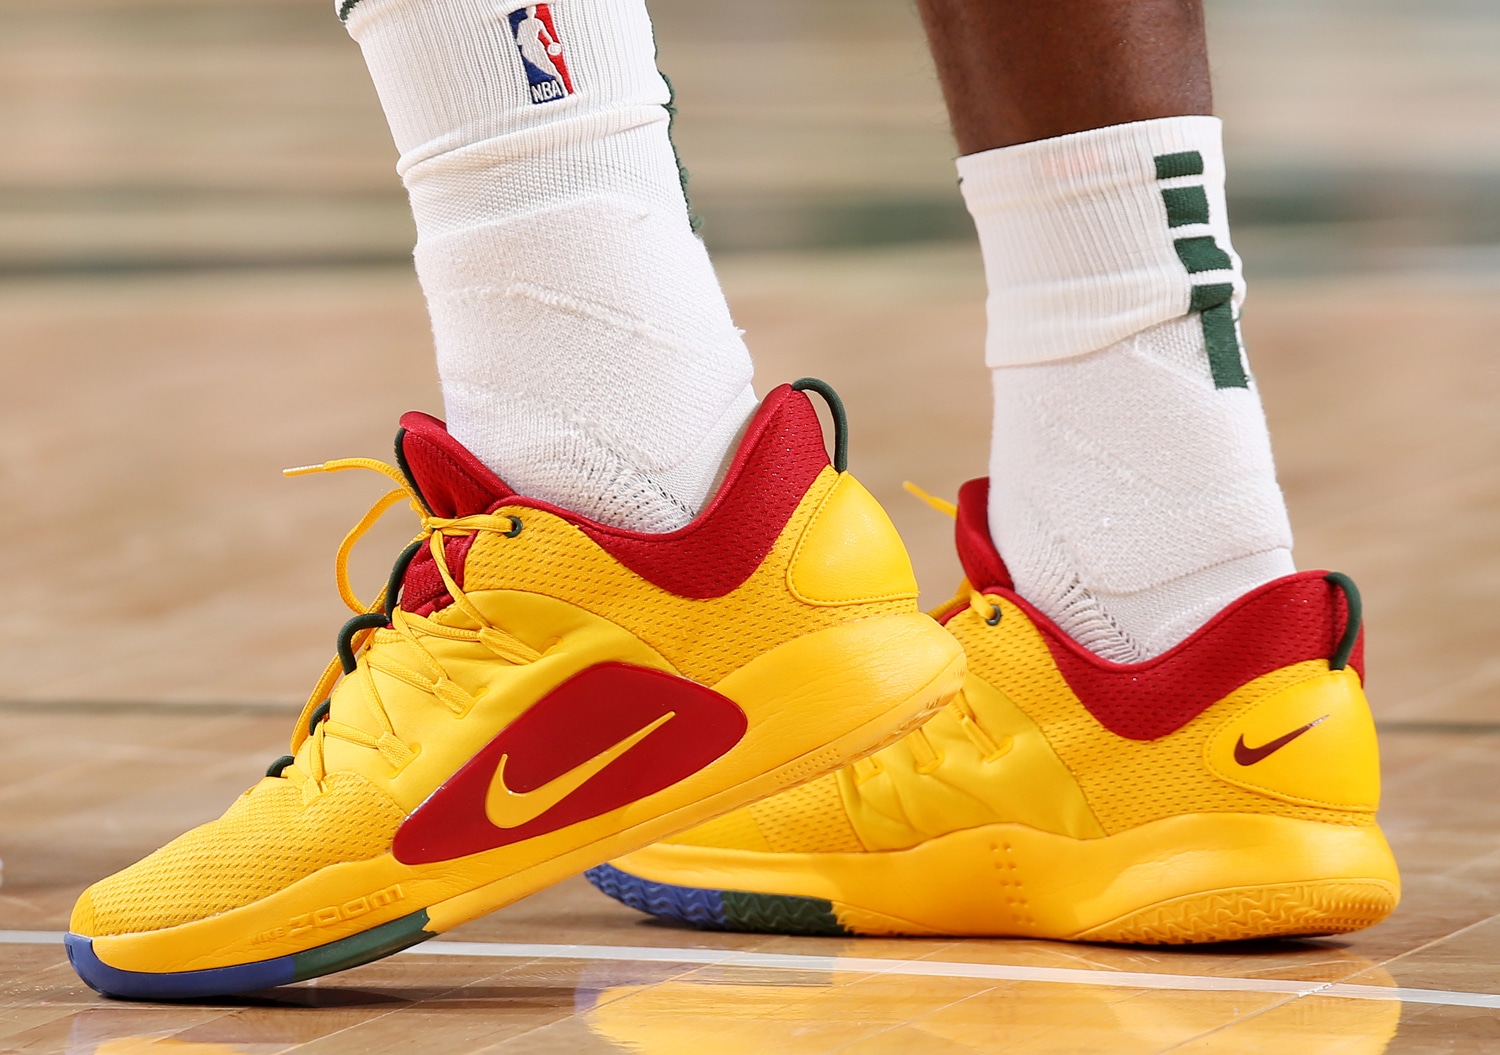 Ranking the Five Best Shoes Worn in the NBA on MLK Day - Sports Illustrated  FanNation Kicks News, Analysis and More